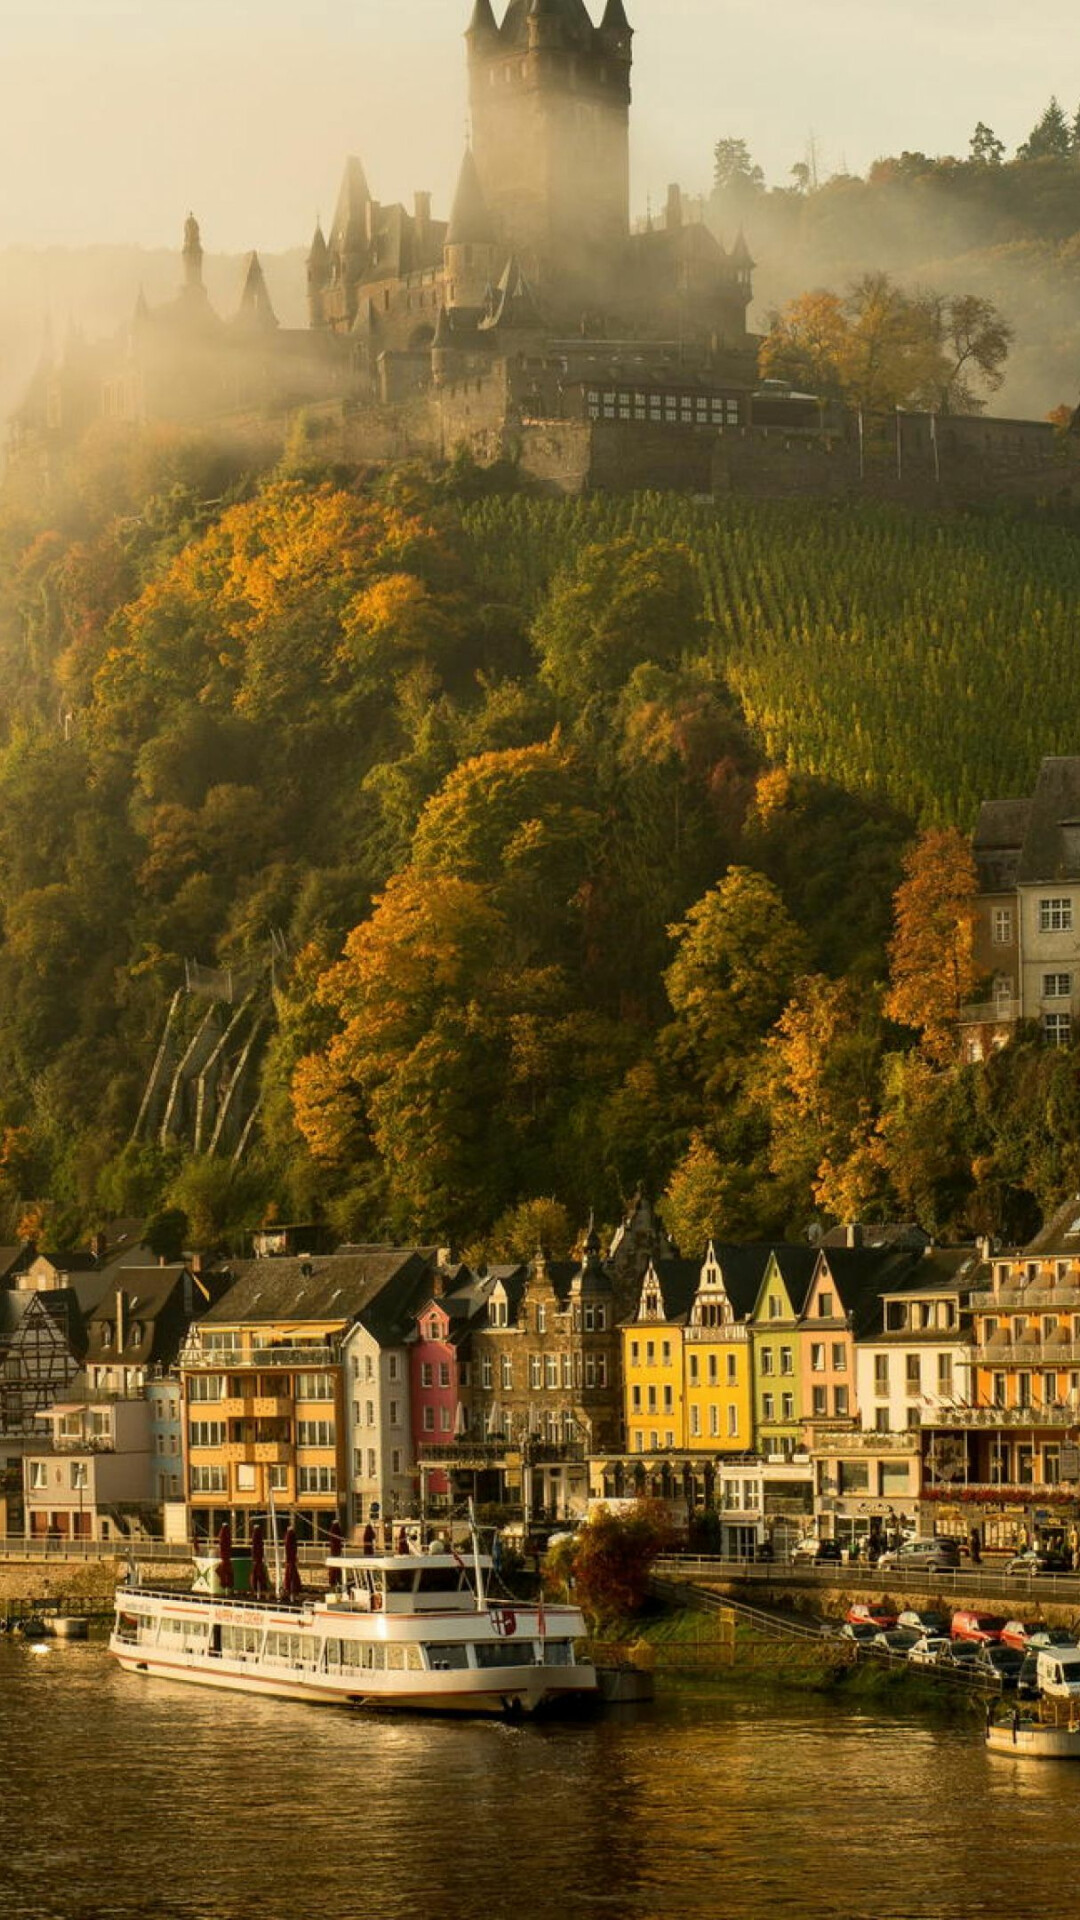 Germany: The home to Bach, Beethoven, Goethe, Schumann, Mendelssohn, Brahms, Wagner, and R. Strauss. 1080x1920 Full HD Background.